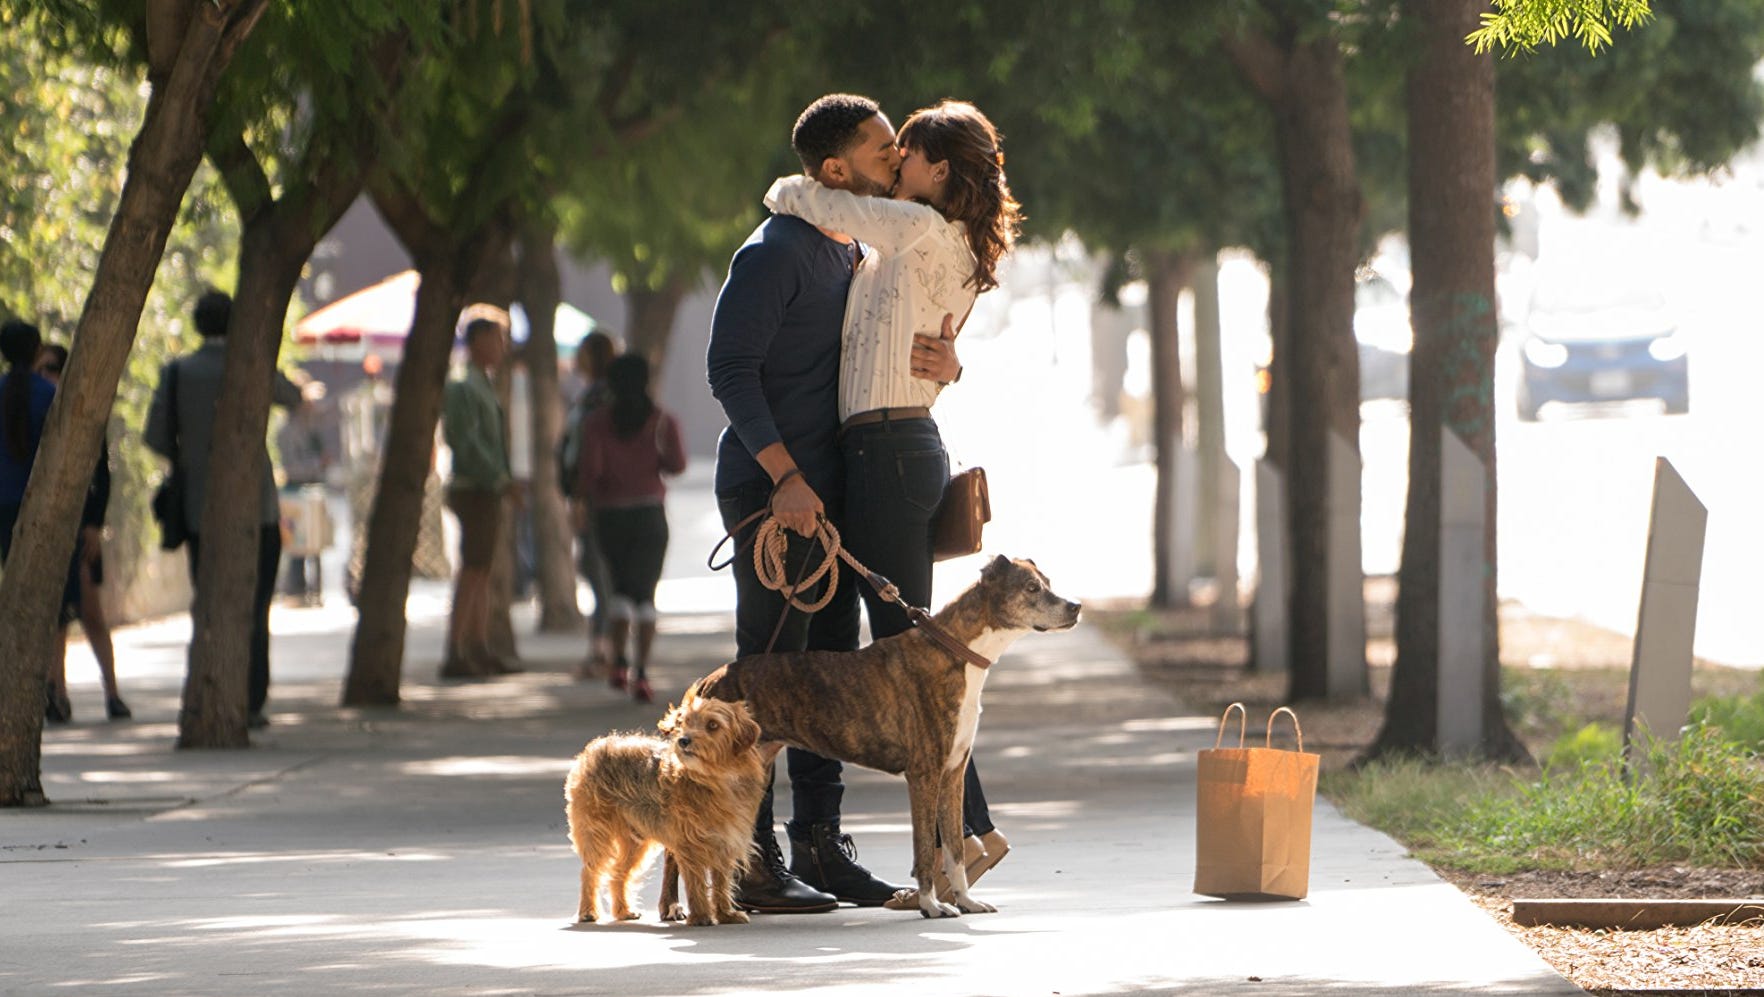 Movie review 'Dog Days' a cutebutsterile comedy about man's best friend